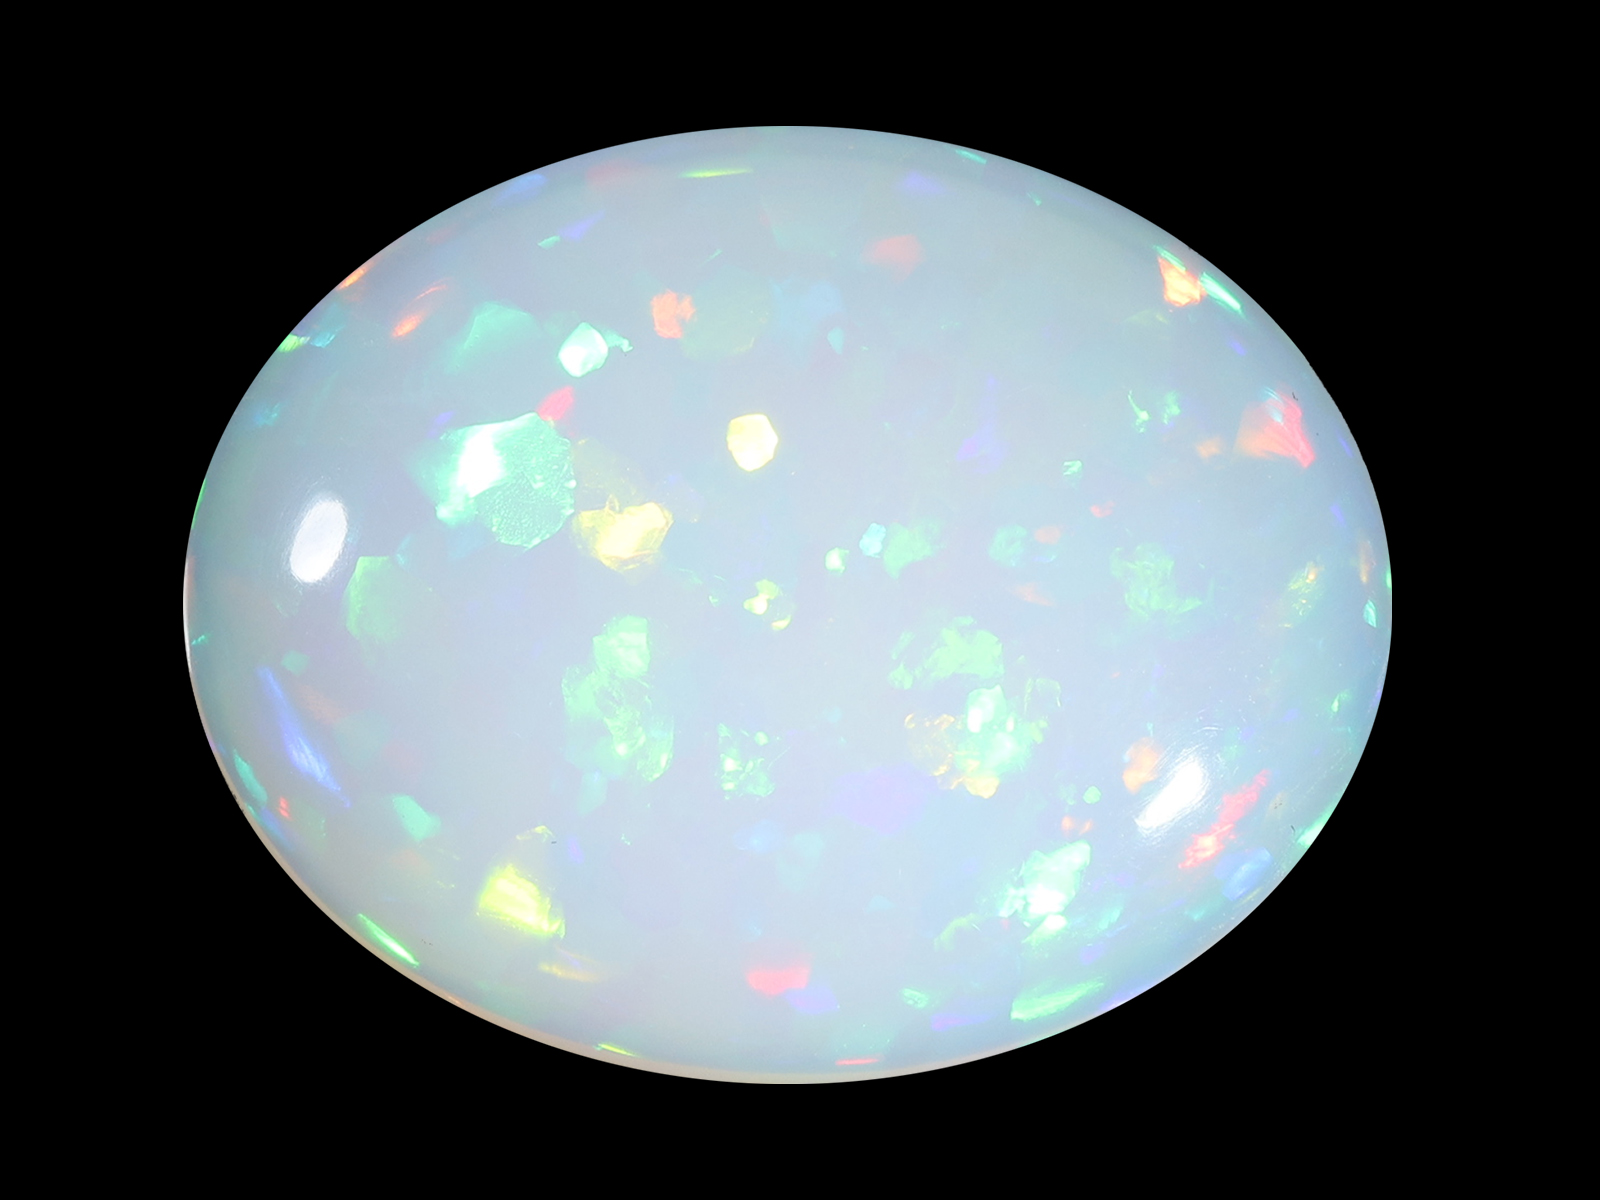 Opal: exceptional opal with beautiful play of colours, approx. 19.3ct